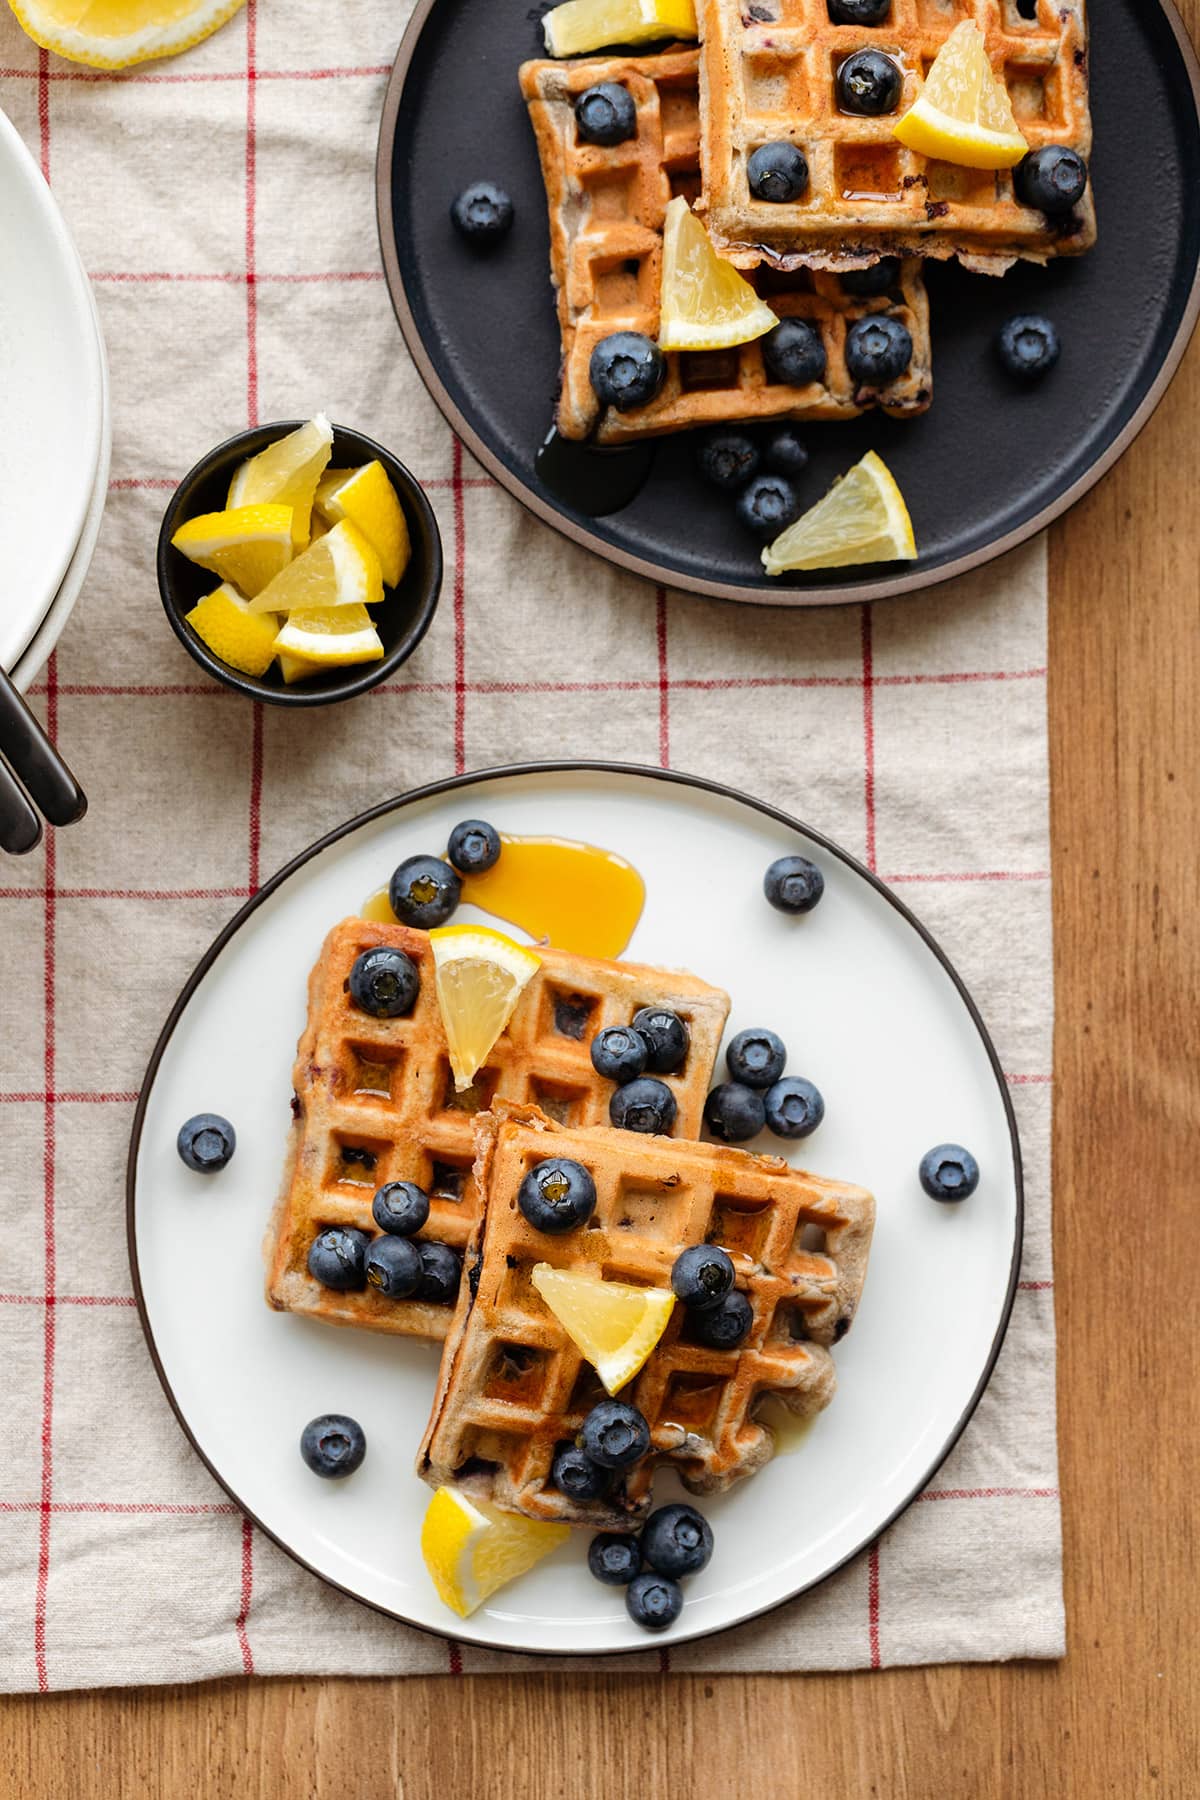 Waffles with blueberries and lemon slices on a white and black plates and a wooden table.